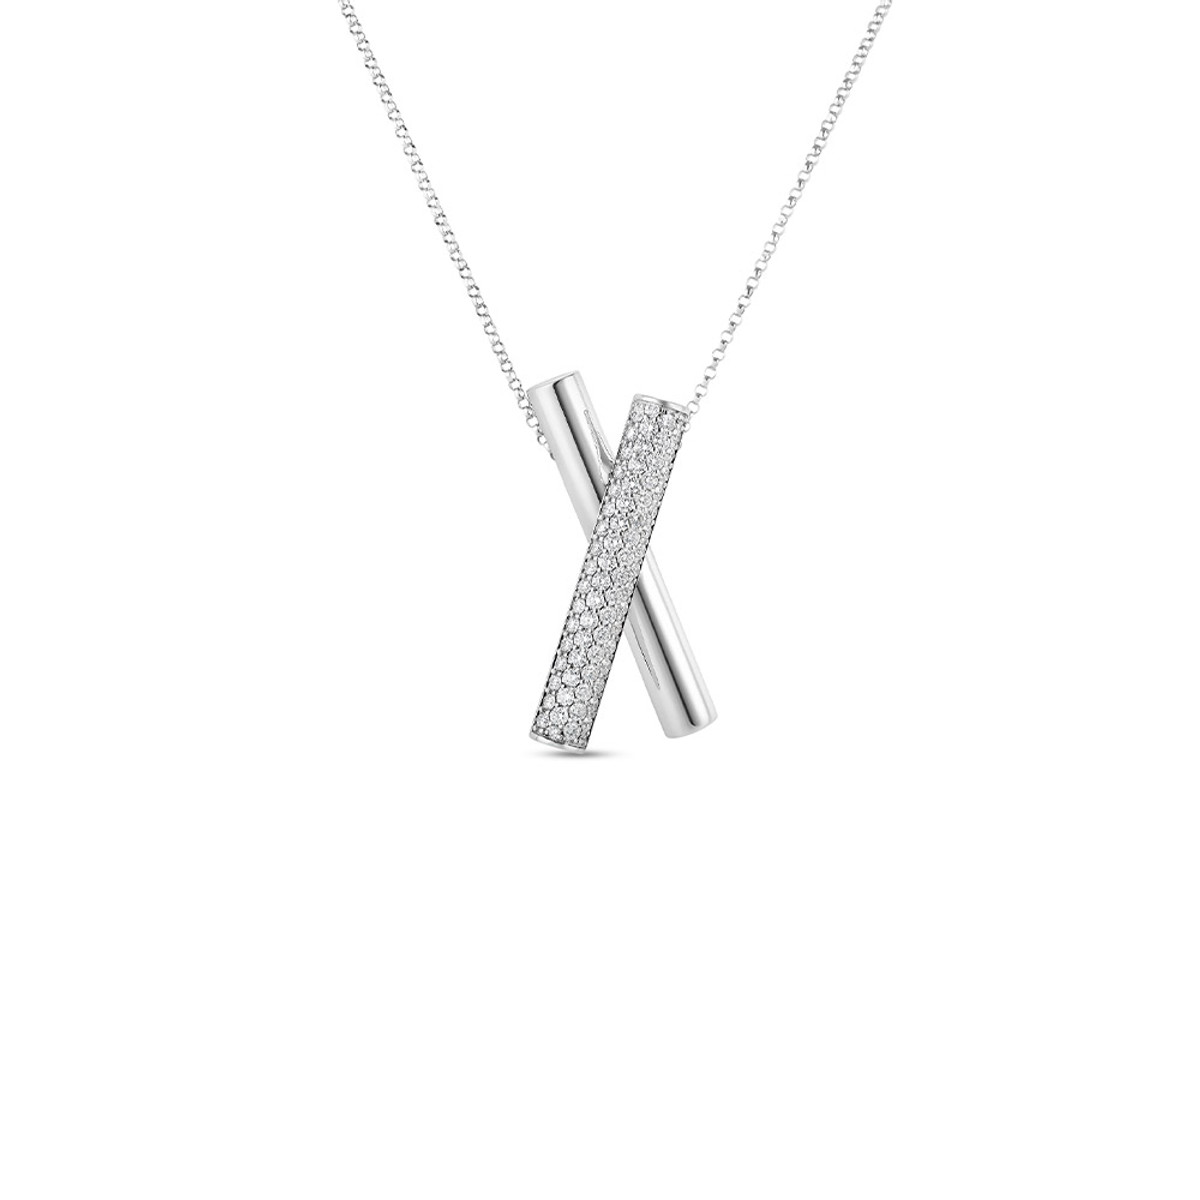 Roberto Coin 18K White Gold Domino Diamond Necklace-57382 Product Image